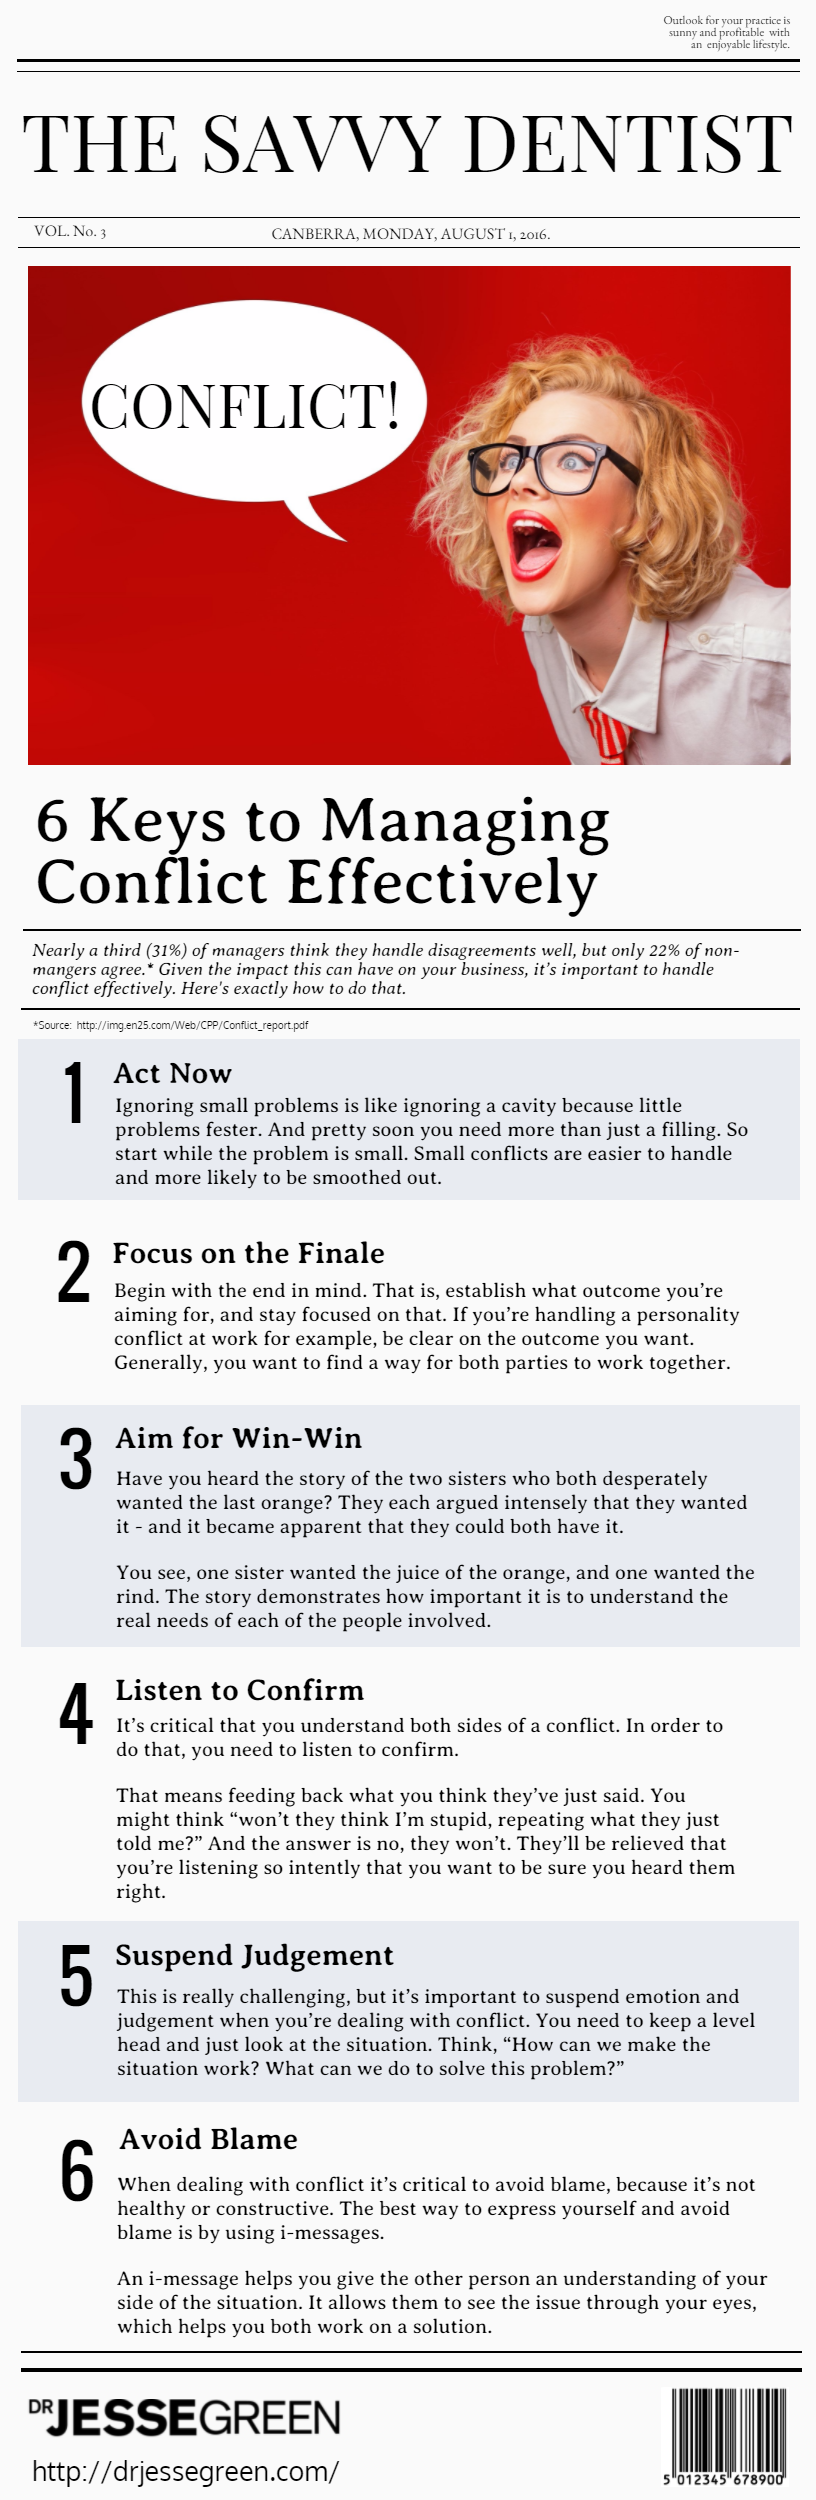 resolving conflict in record time